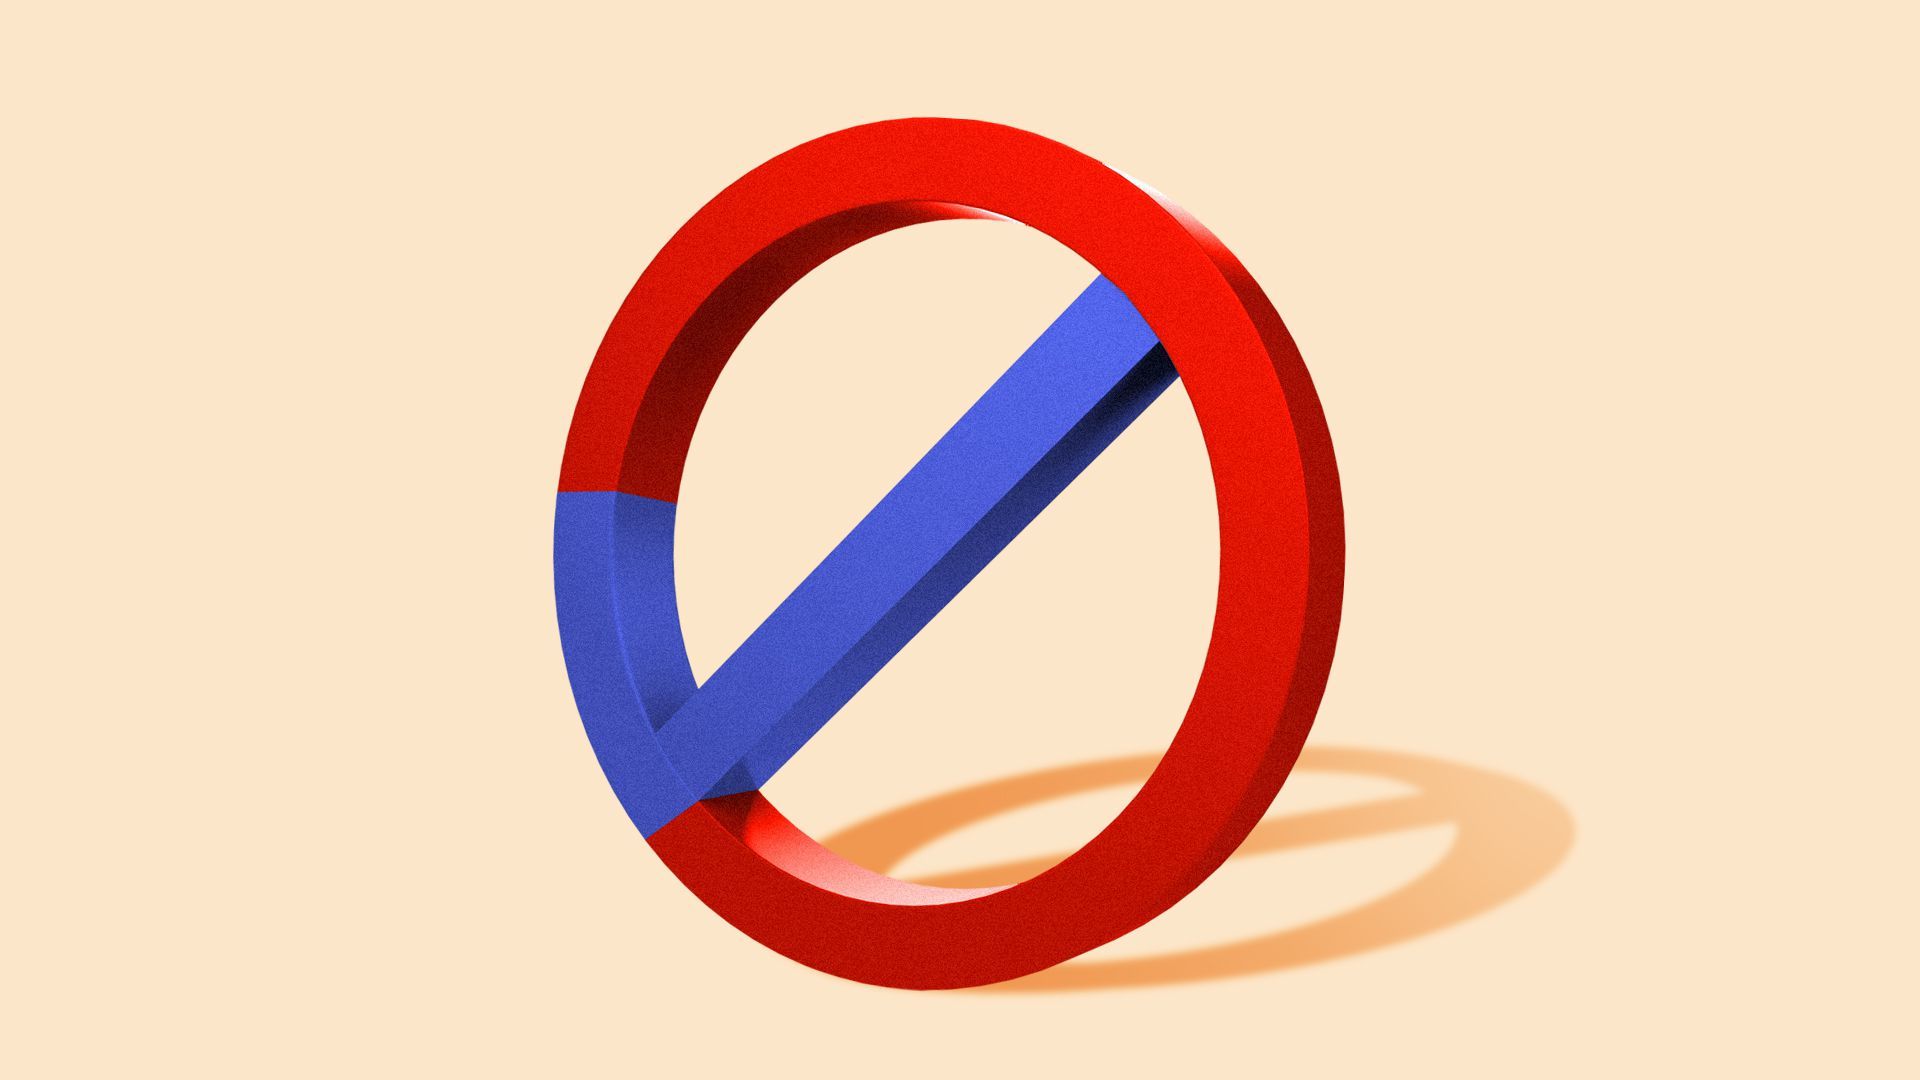 Illustration of a "no" symbol with a blue checkmark in the middle